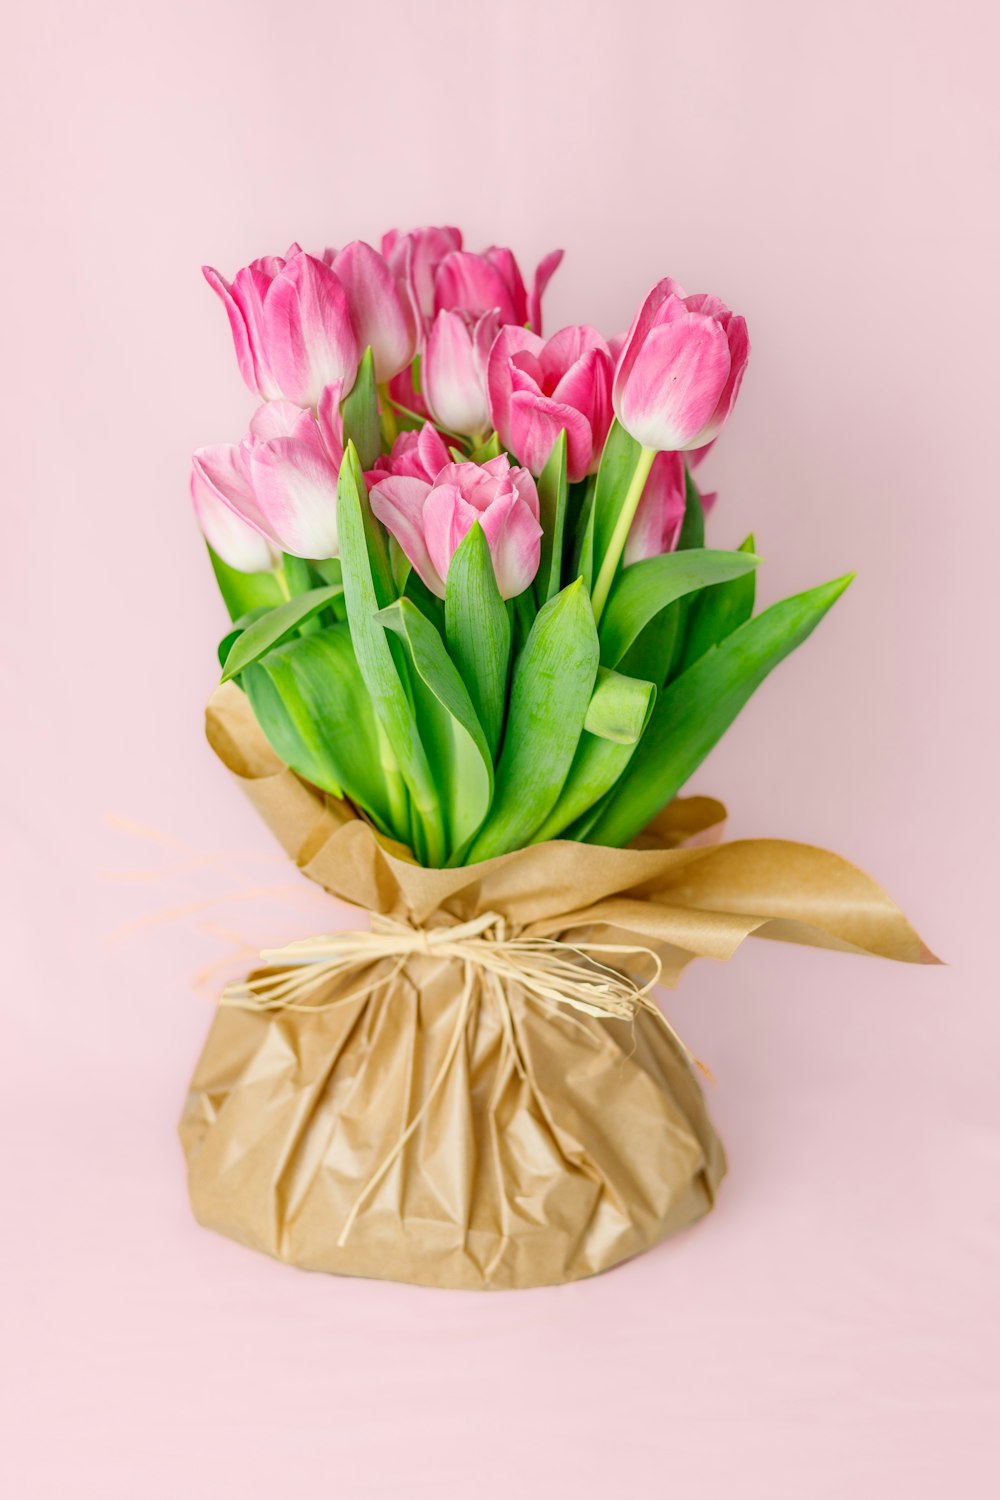 a bouquet of pink and white tulips in a paper bag